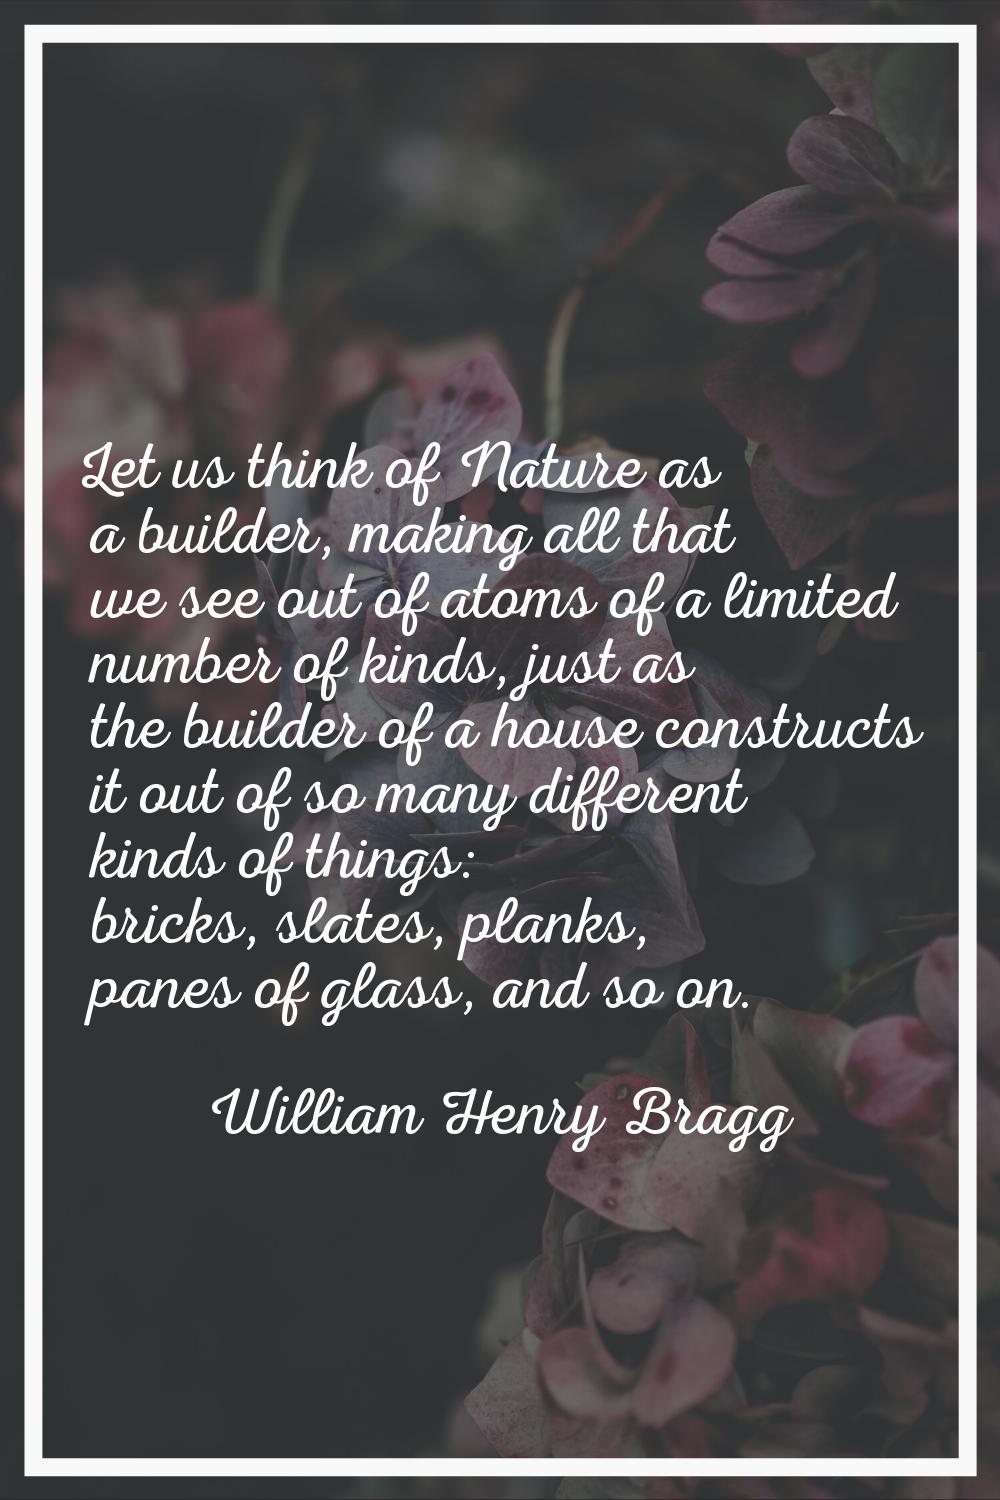 Let us think of Nature as a builder, making all that we see out of atoms of a limited number of kin